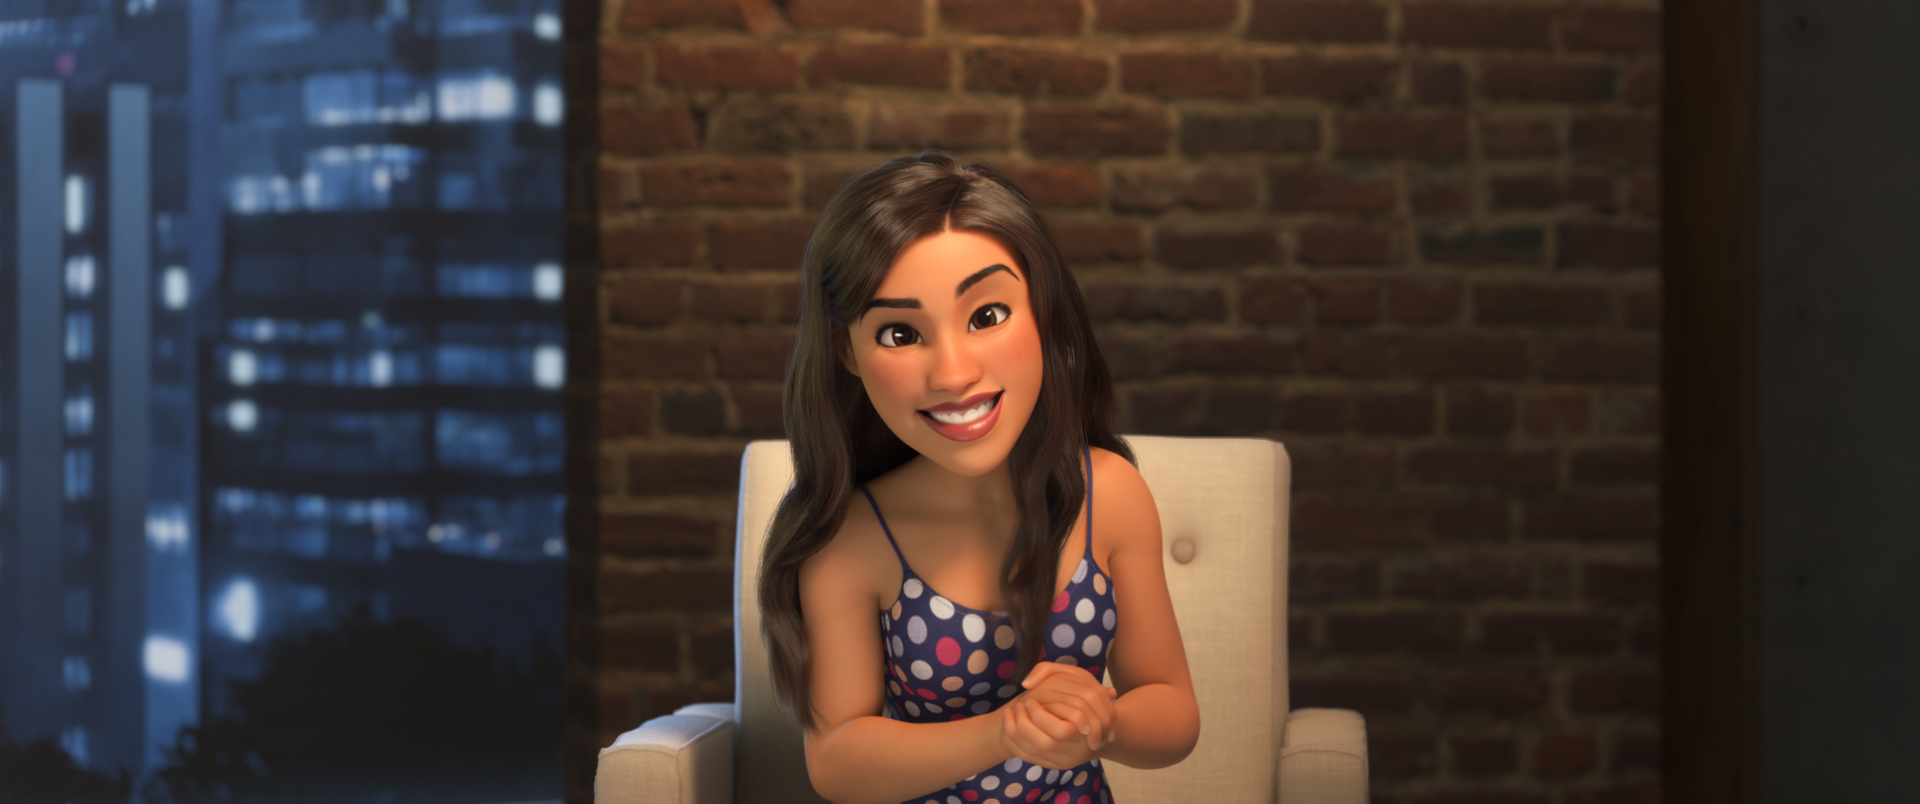 Check out the Digital Influencers Cast in Ralph Breaks the Internet as Announced at New York Comic Con